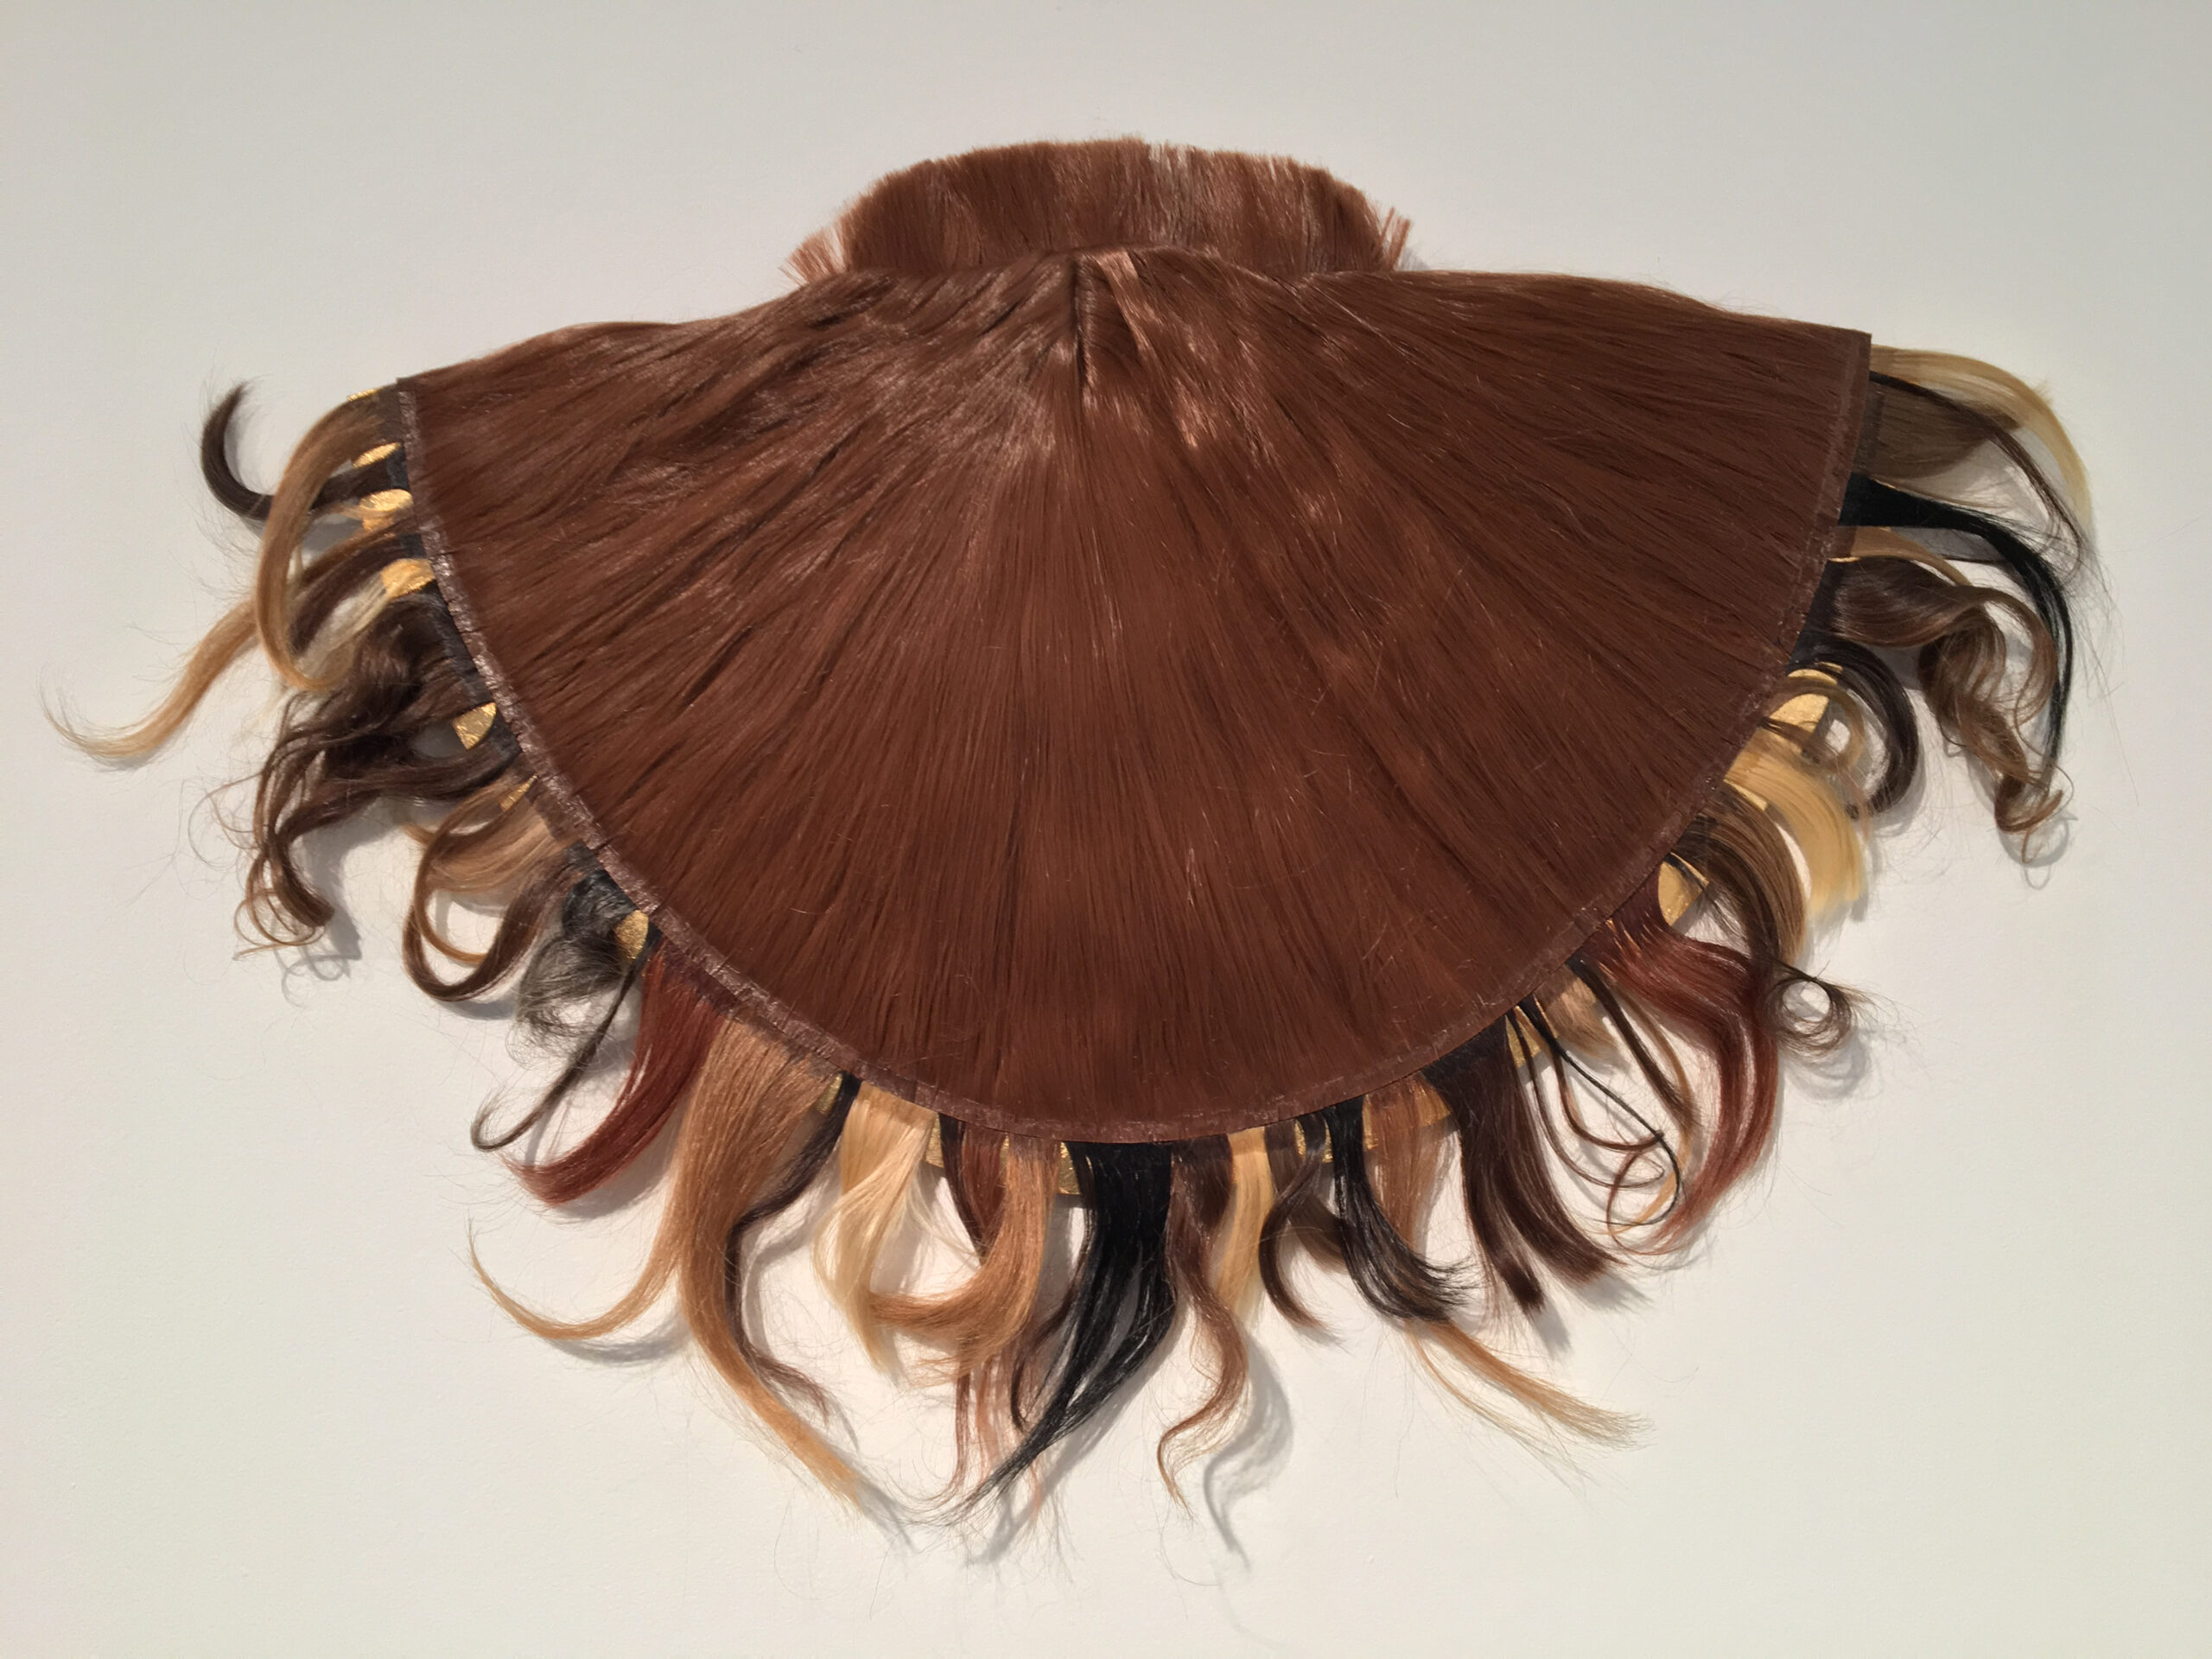 Procession (2016) Altered wig and 47 locks of human hair